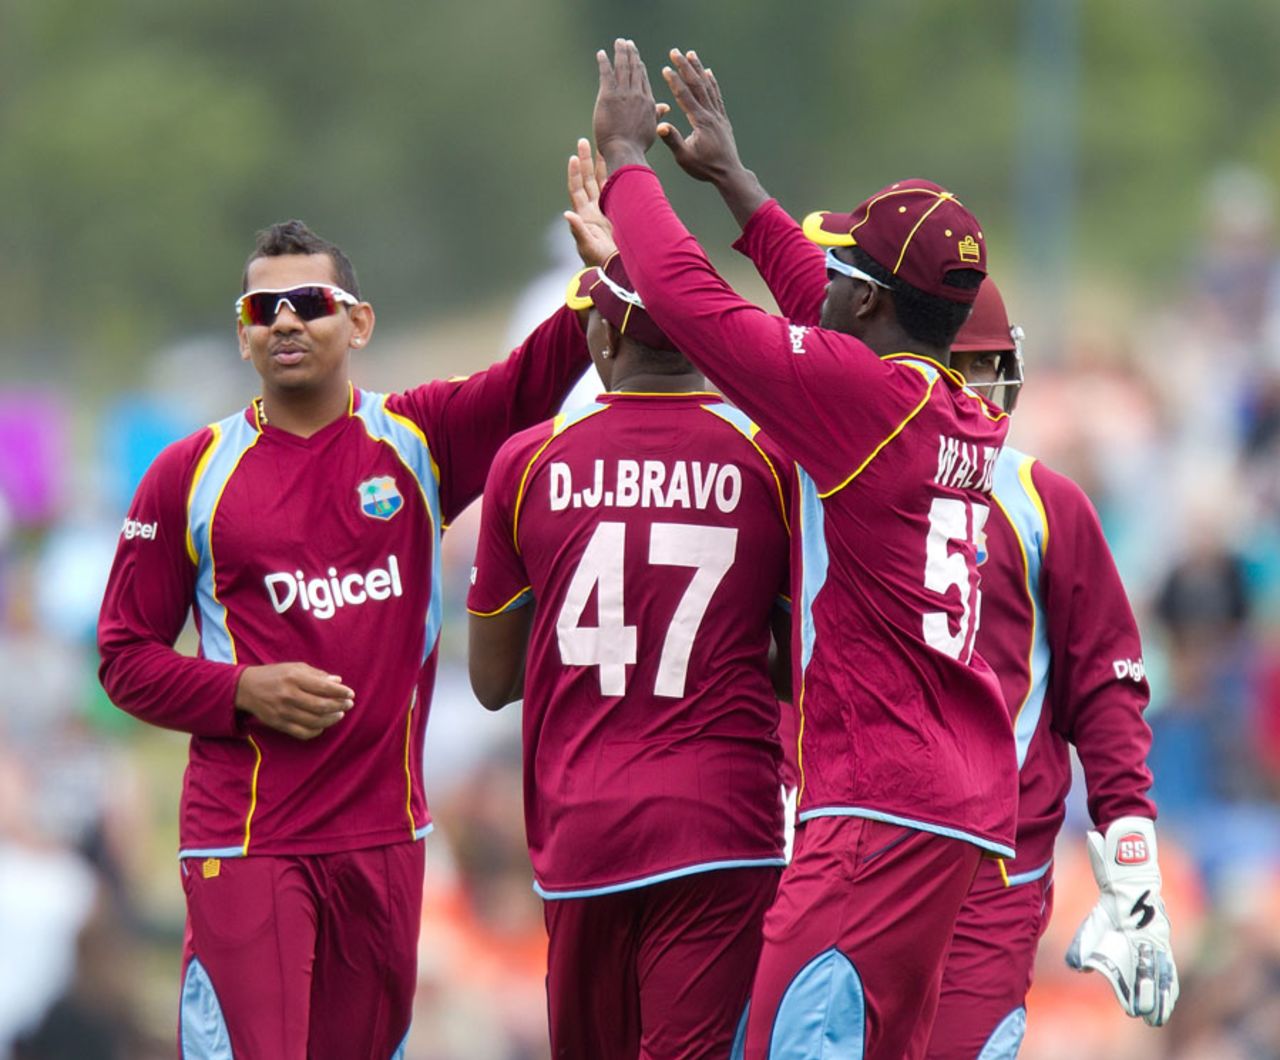 Sunil Narine picked up a wicket in an economical spell, New Zealand v West Indies, 4th ODI, Nelson, January 4, 2014